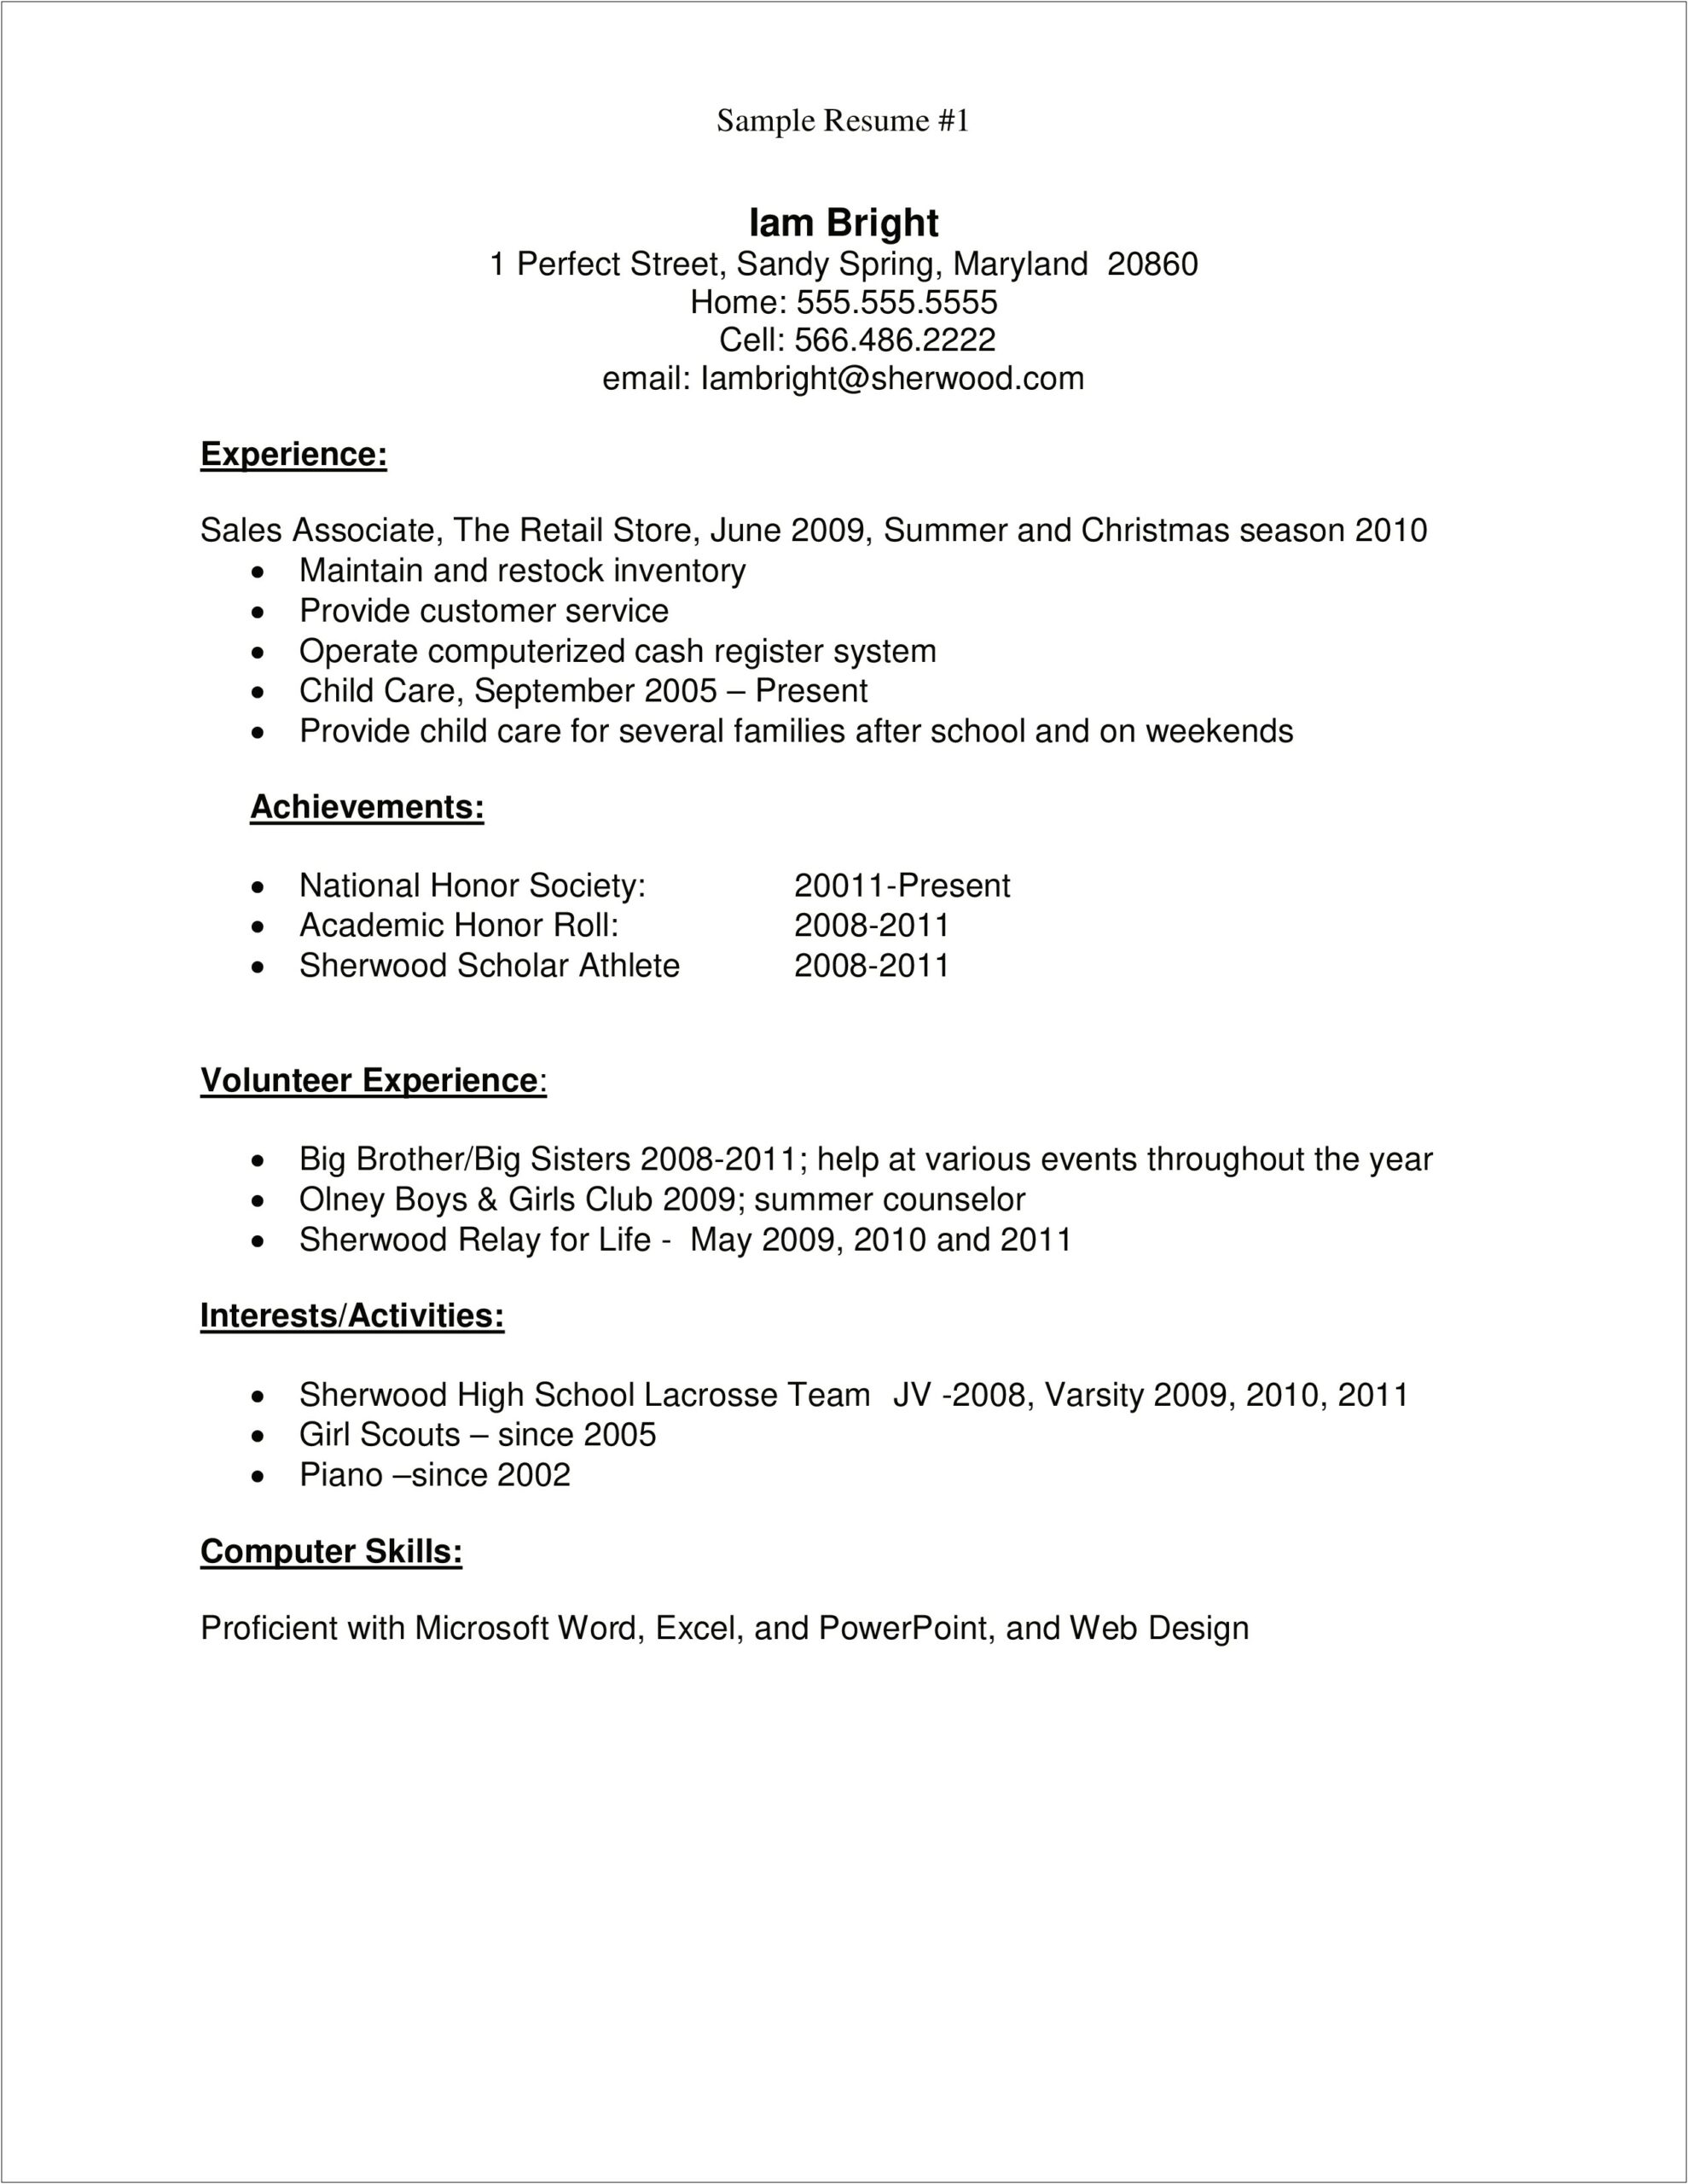 Writing A Resume For Working In A School